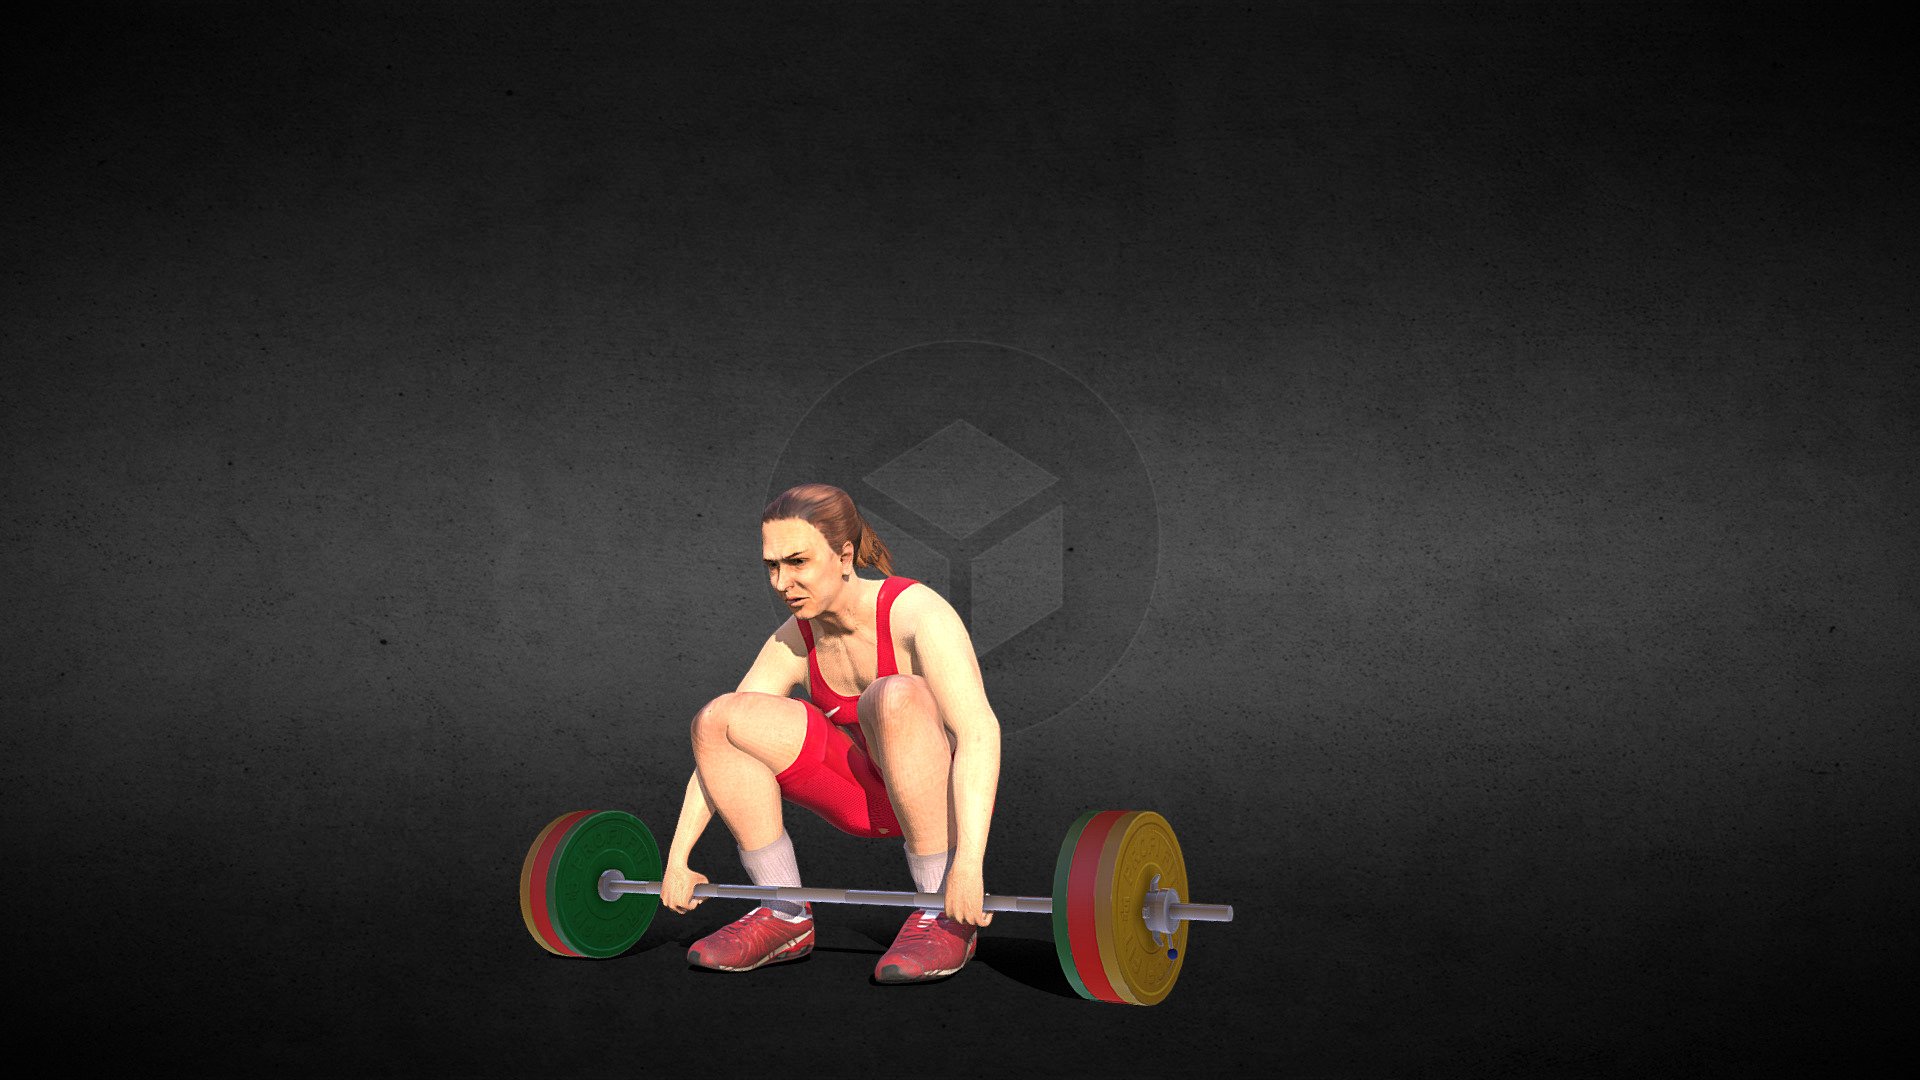 Weightlifter, athlete animated with a  use in games or other situations Fully textured, low poly without loss of quality.

The rendering was done 3D max 2014 using Corona render. Normal and Specular textures are included. Size of textures for Body and Clothing is 2048x2048 3d model